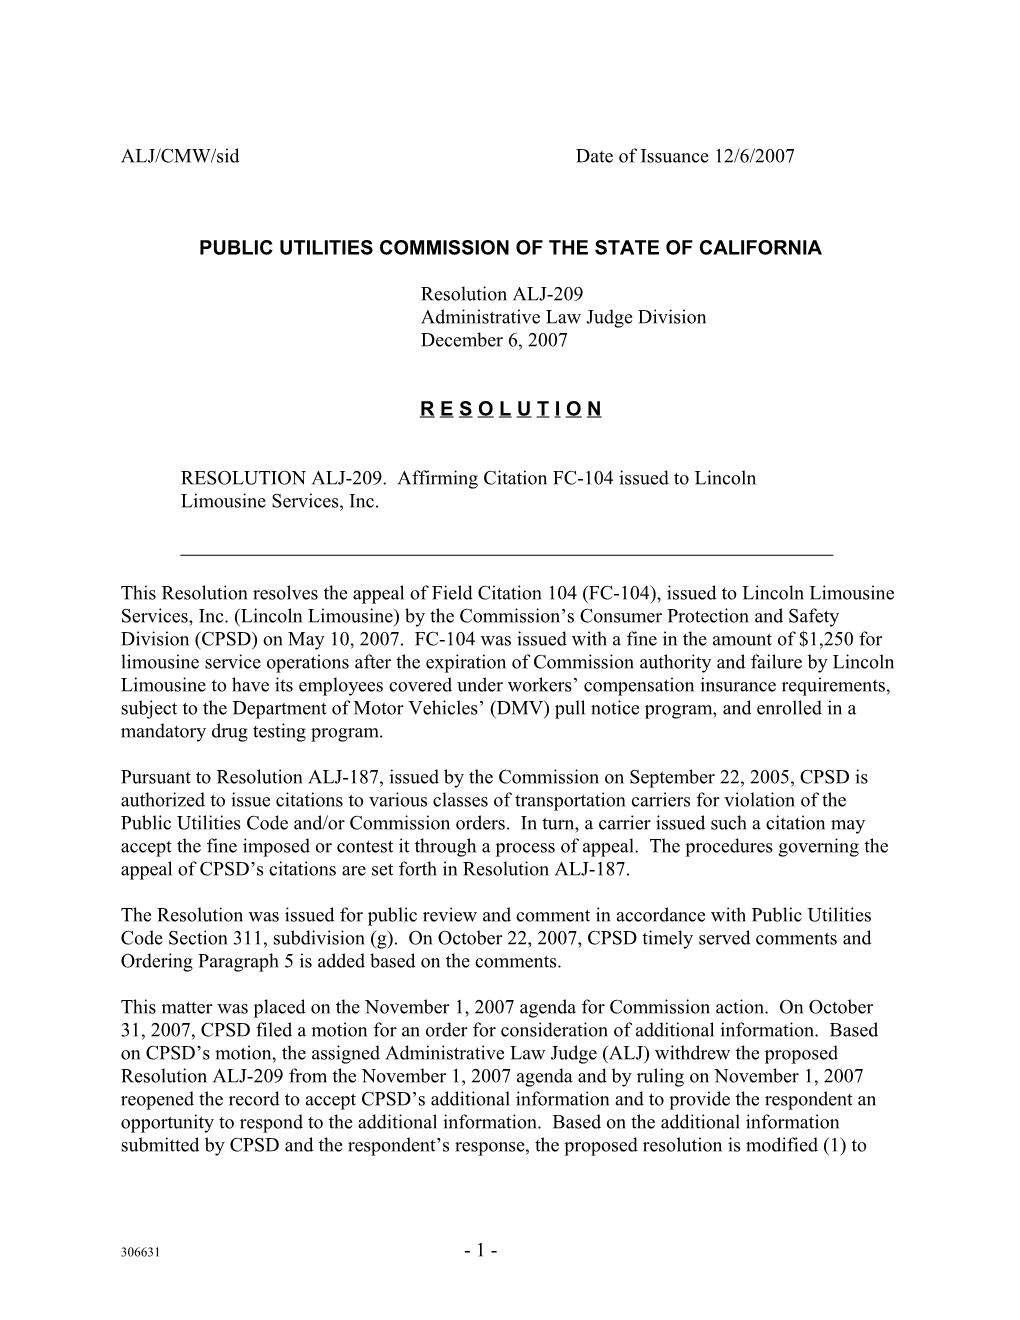 Public Utilities Commission of the State of California s71